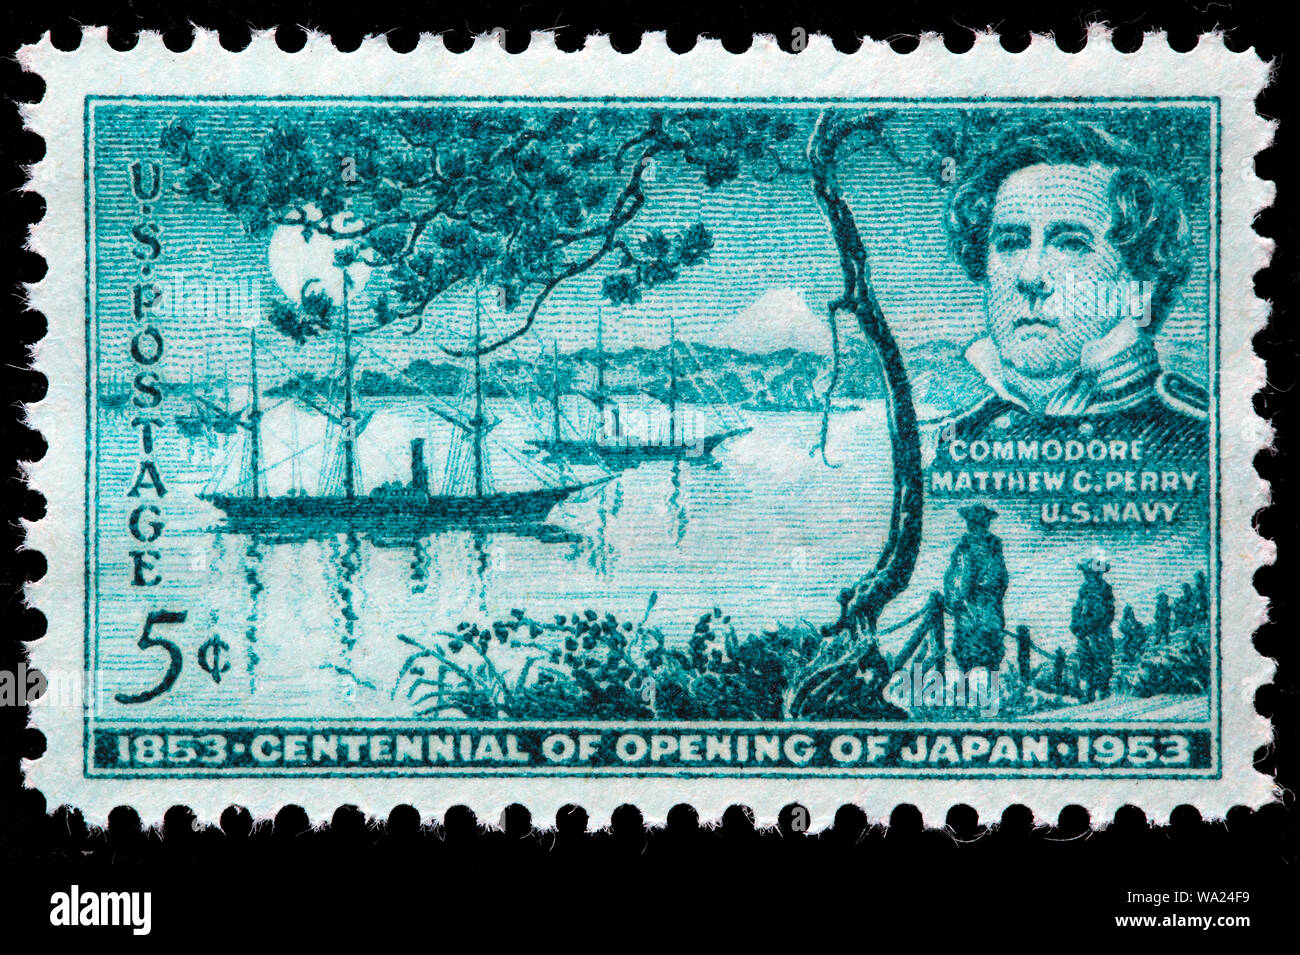 Commodore Matthew C. Perry (1794-1858), First Anchorage of Tokyo Bay, Opening of Japan, postage stamp, USA, 1953 Stock Photo